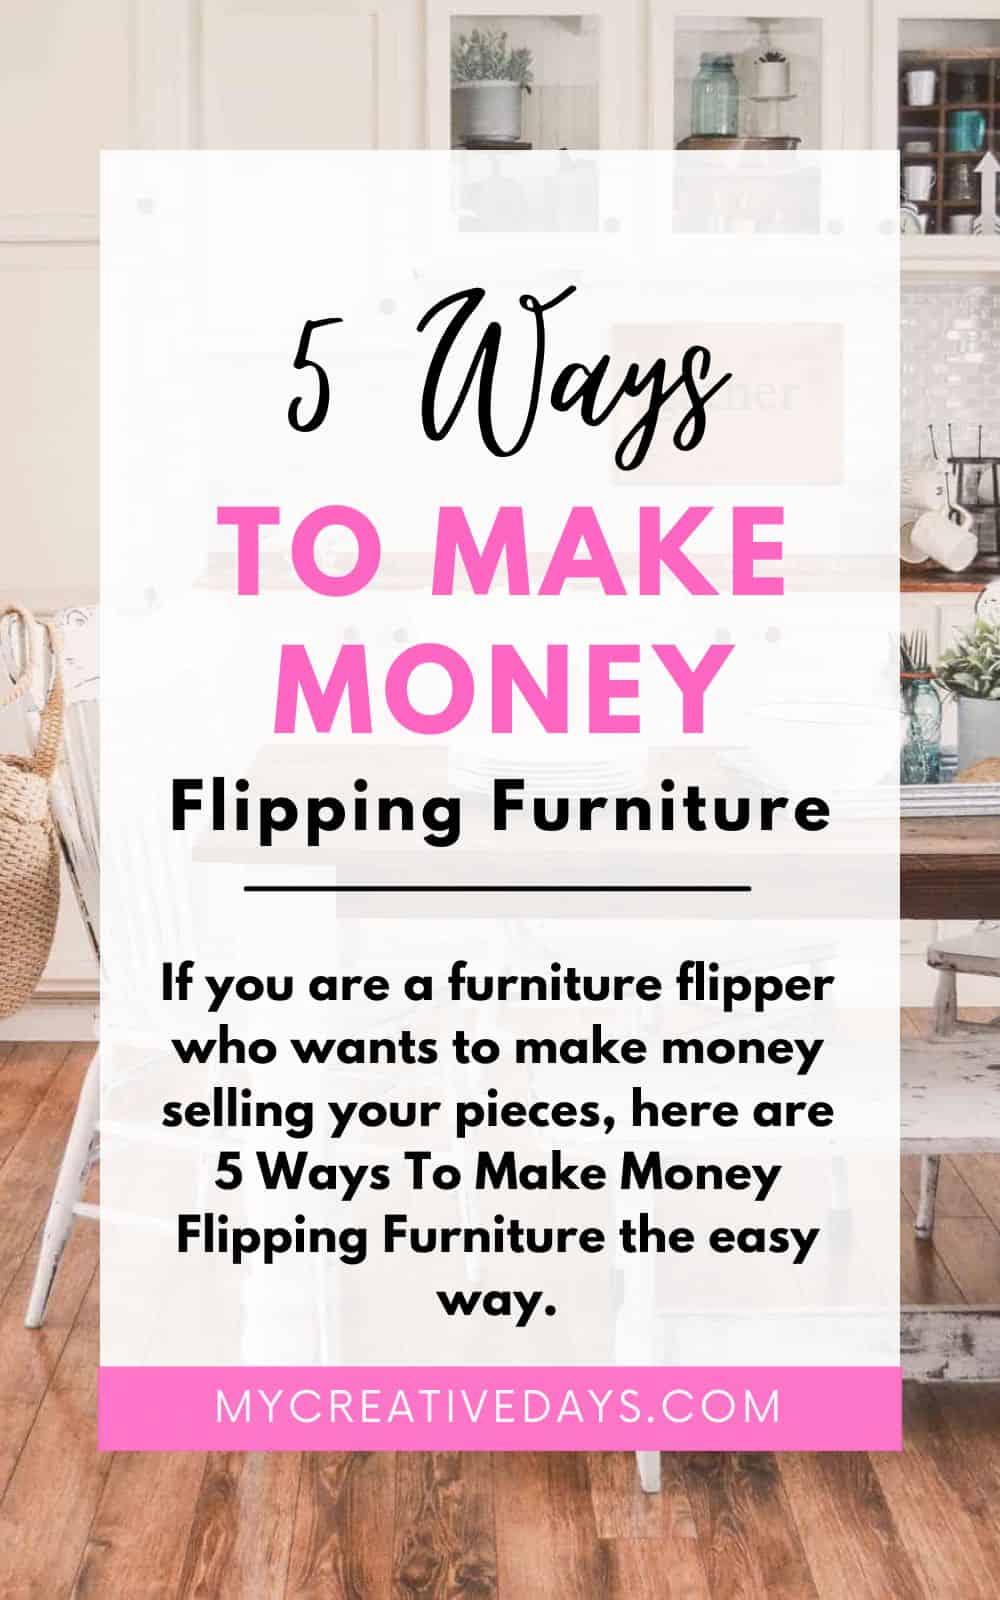 If you are a furniture flipper who wants to make money selling your pieces, here are 5 Ways To Make Money Flipping Furniture the easy way.